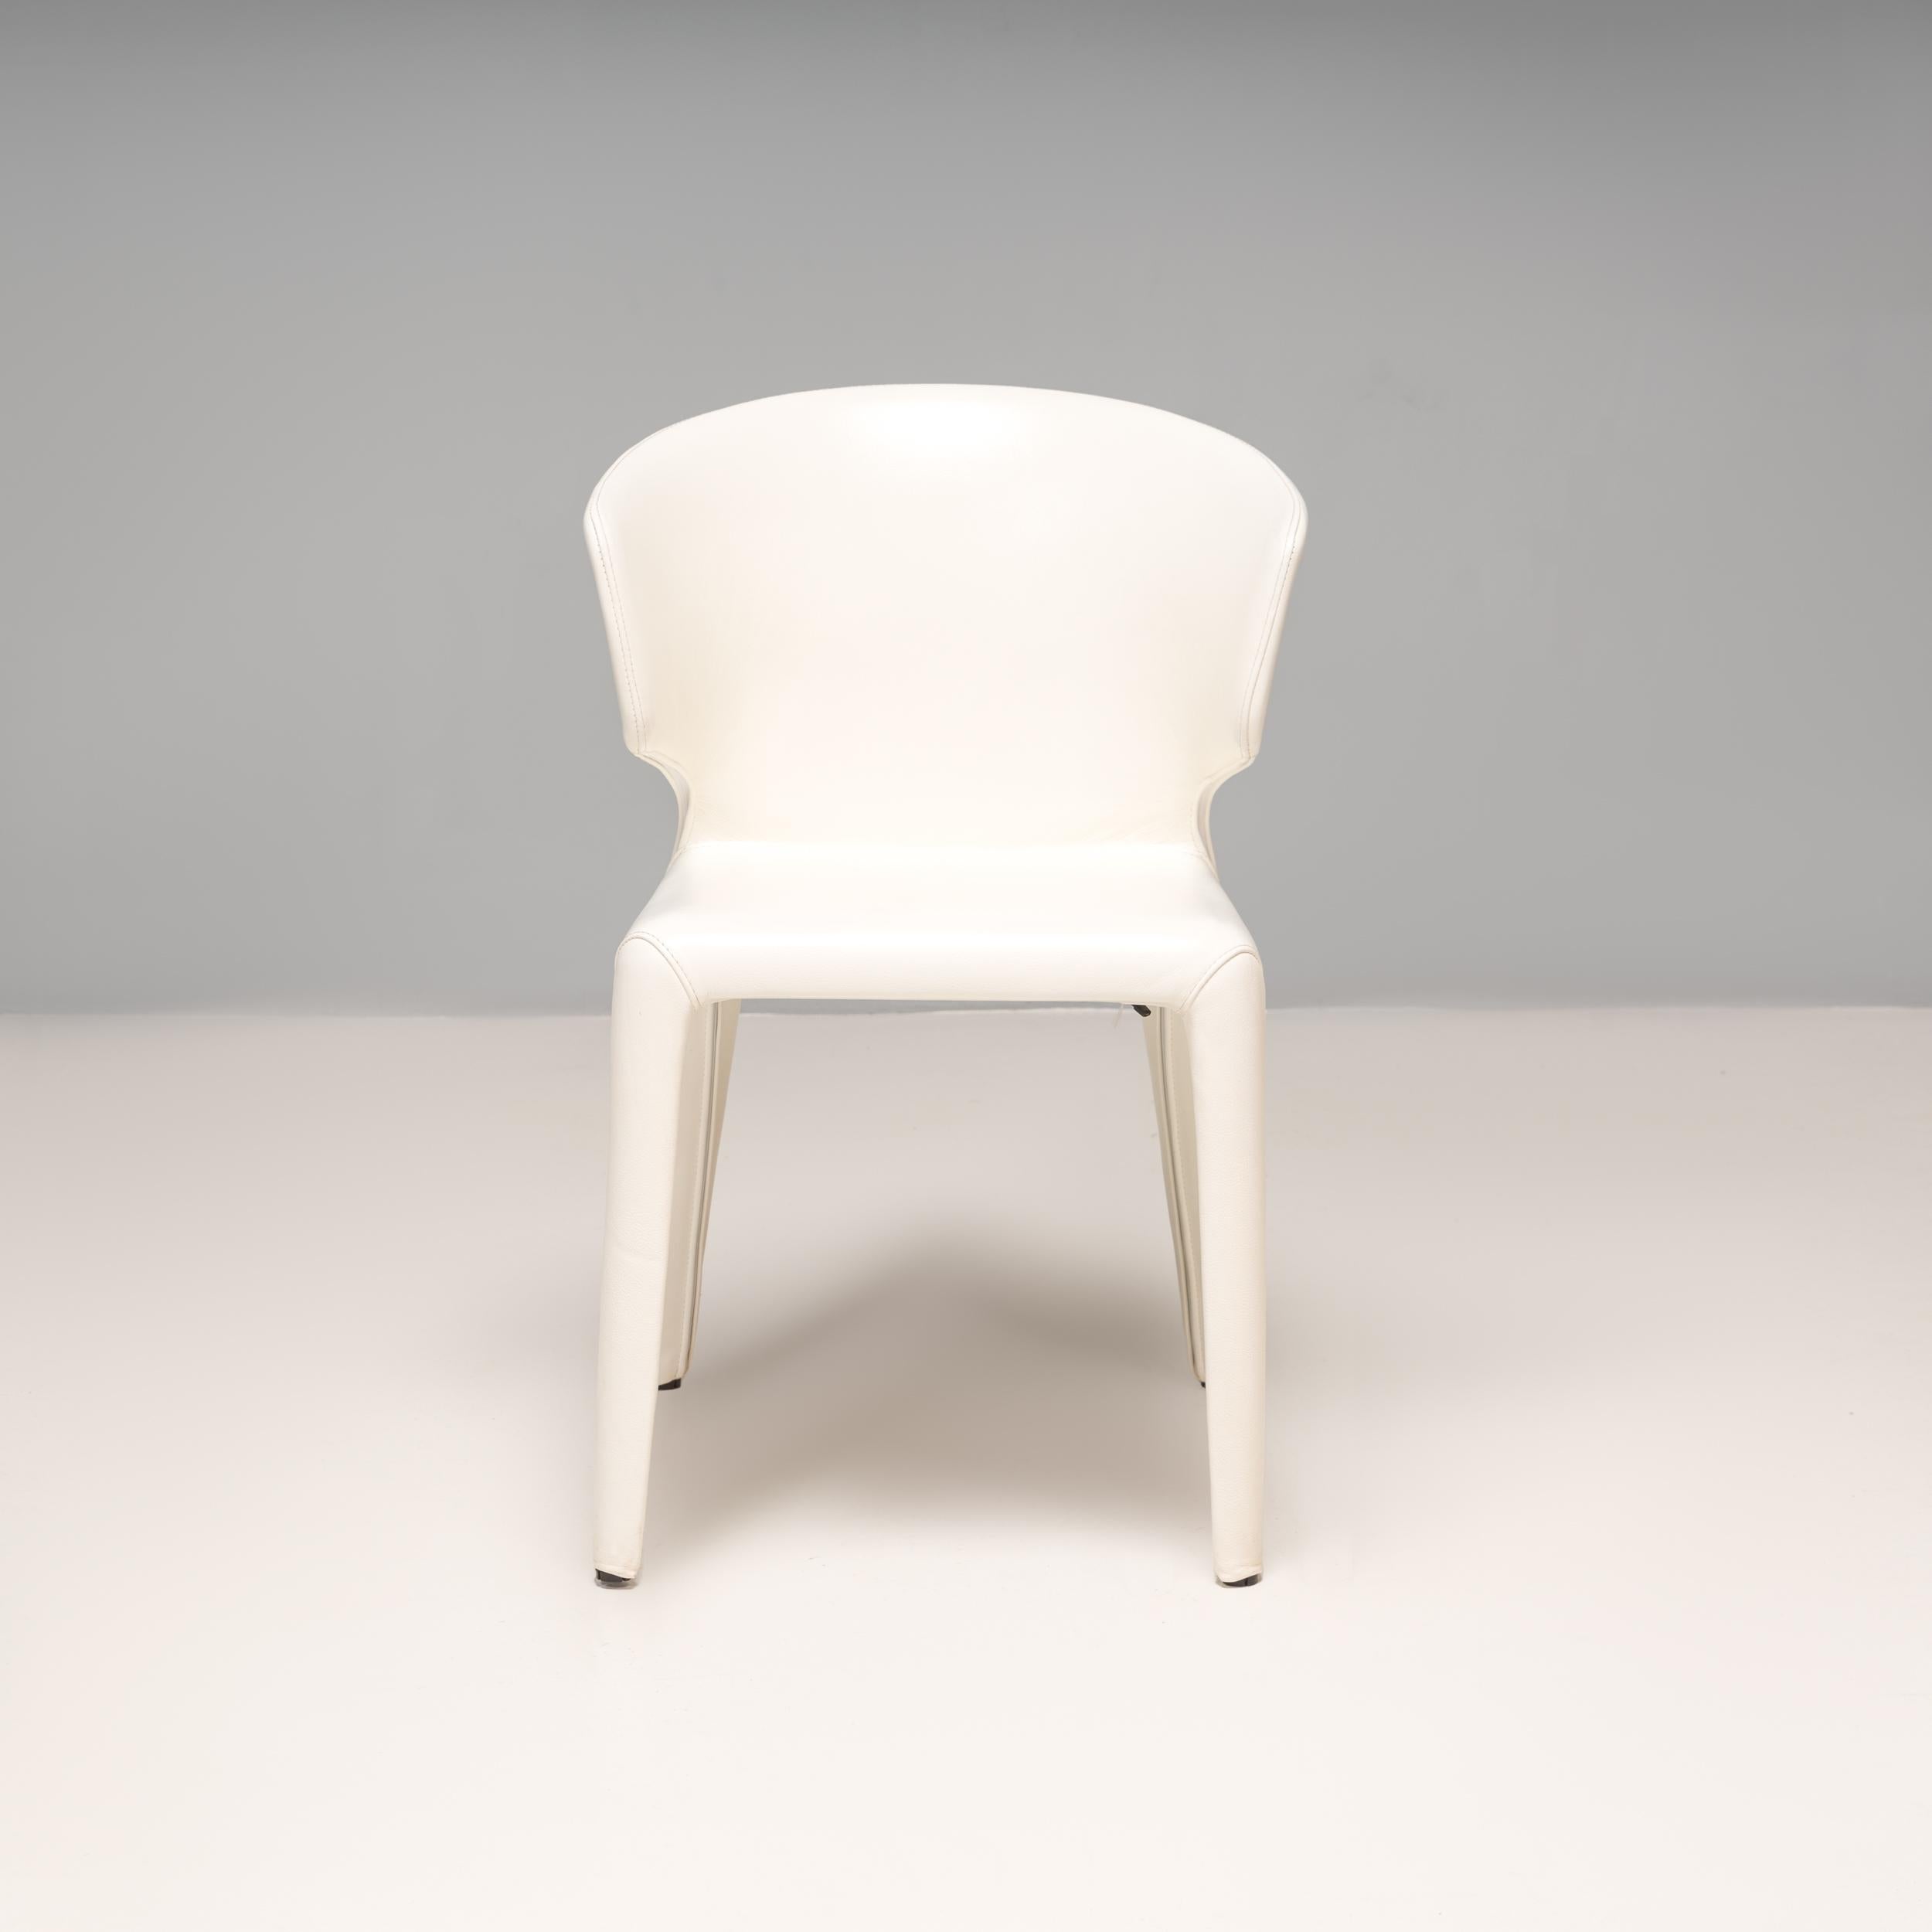 Steel Cassina by Hannes Wettstein 367 Hola White Leather Dining Chairs, Set of 8